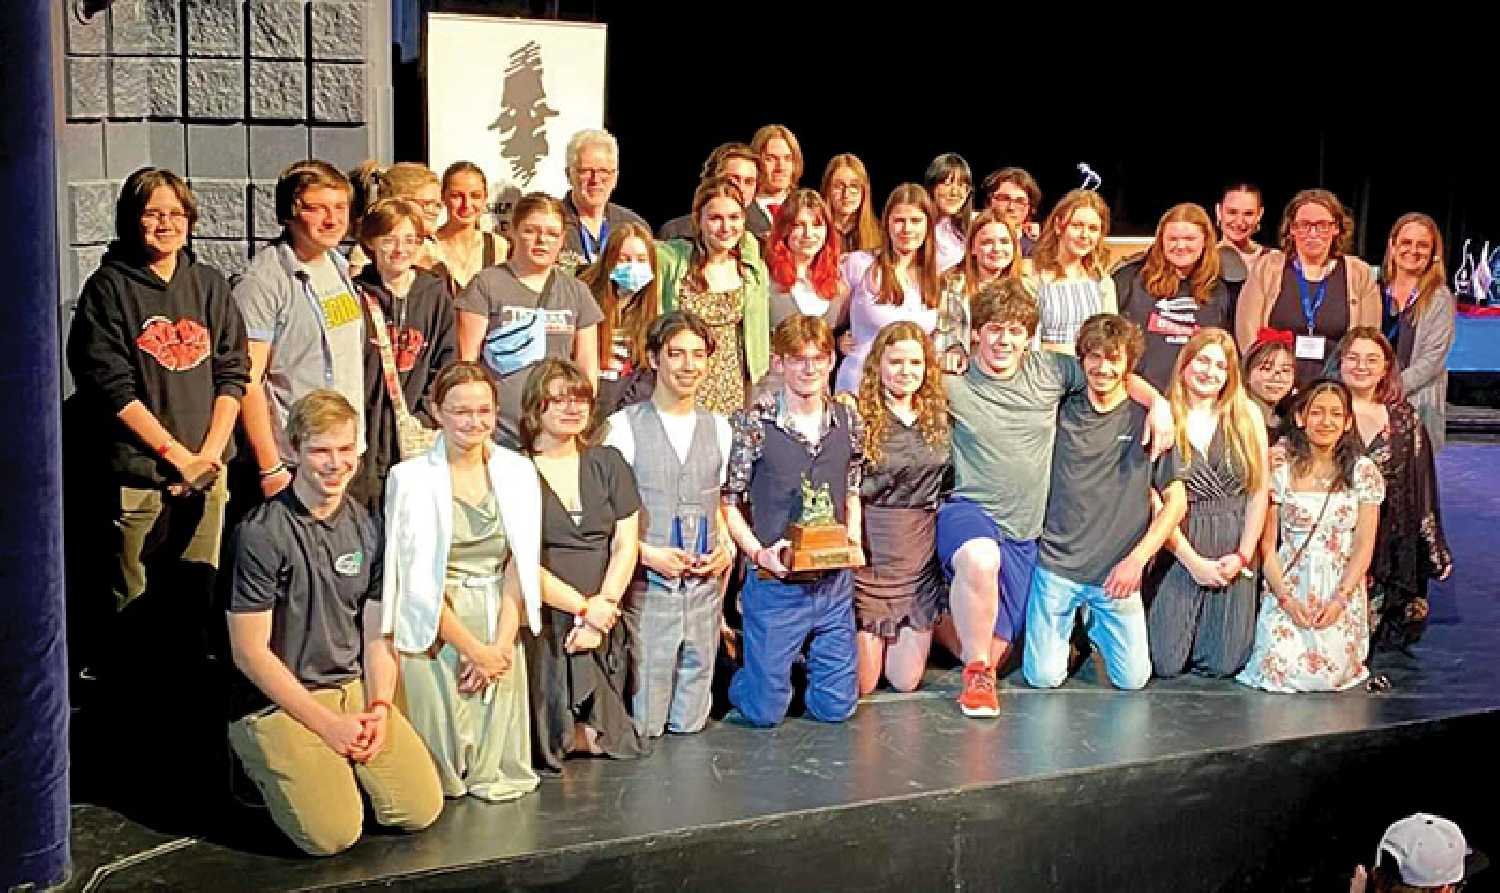 The Esterhazy High School Drama Program received awards for Best Technical Crew and Best Overall Production as well as two acting awards.